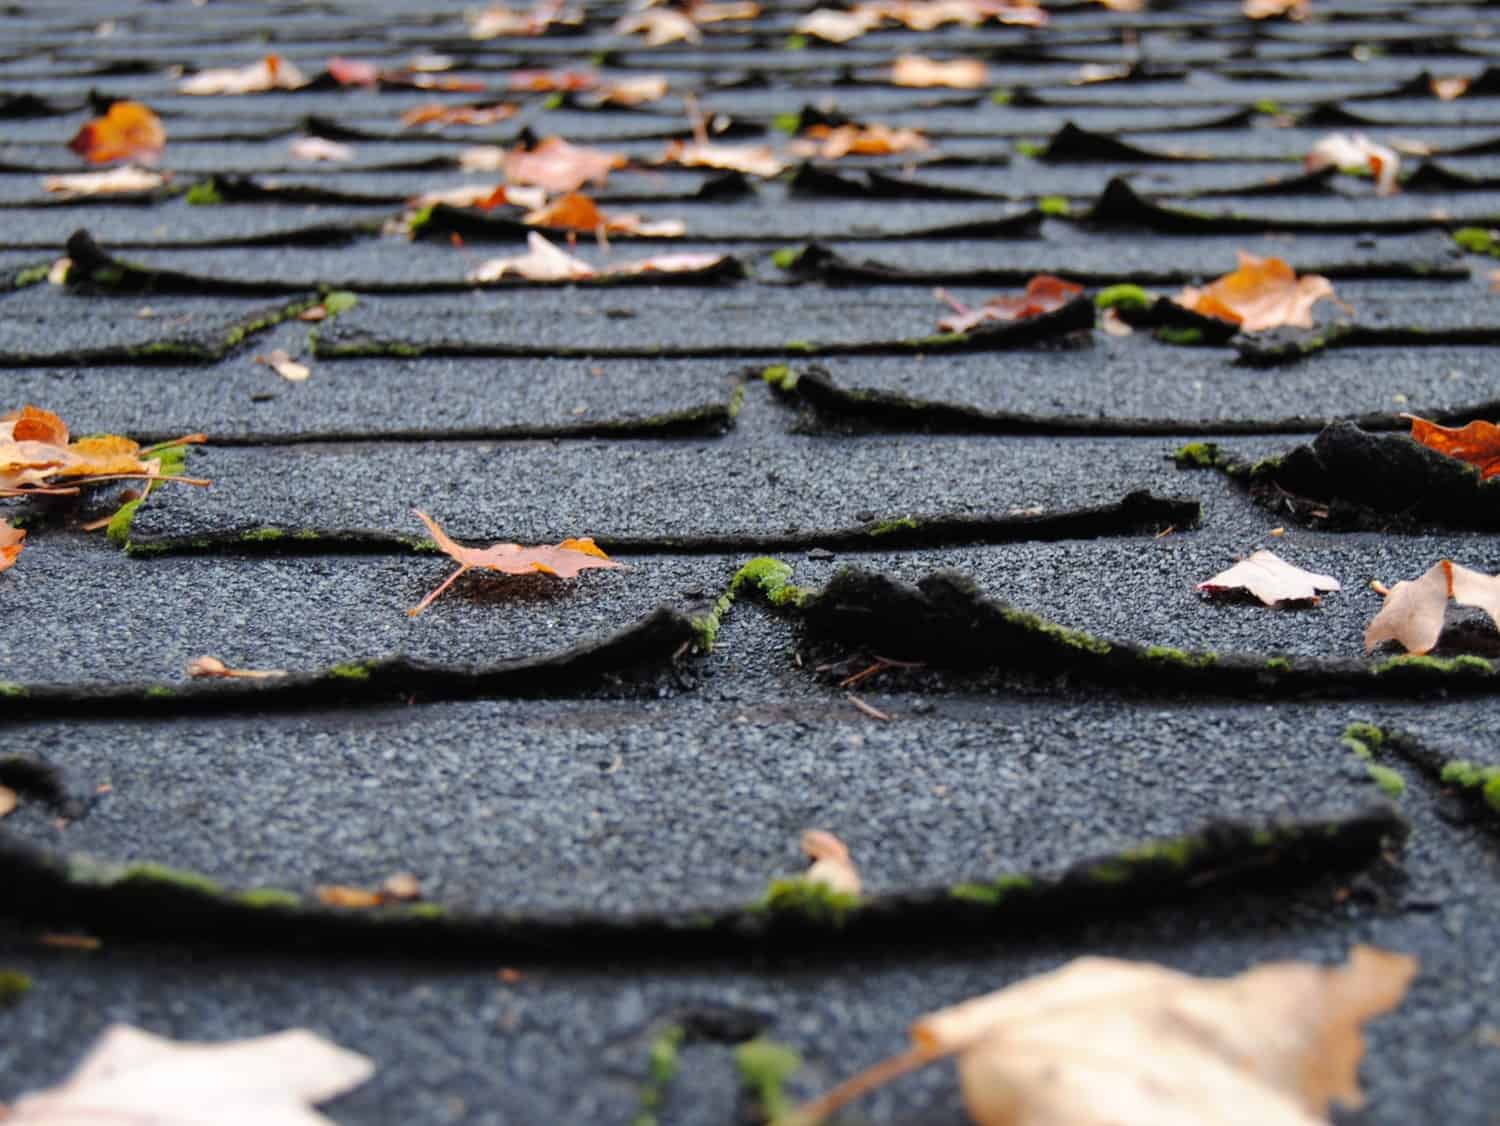 These old asphalt roof shingles are curling at the edges - curling shingles are often a sign of problems with your roof.